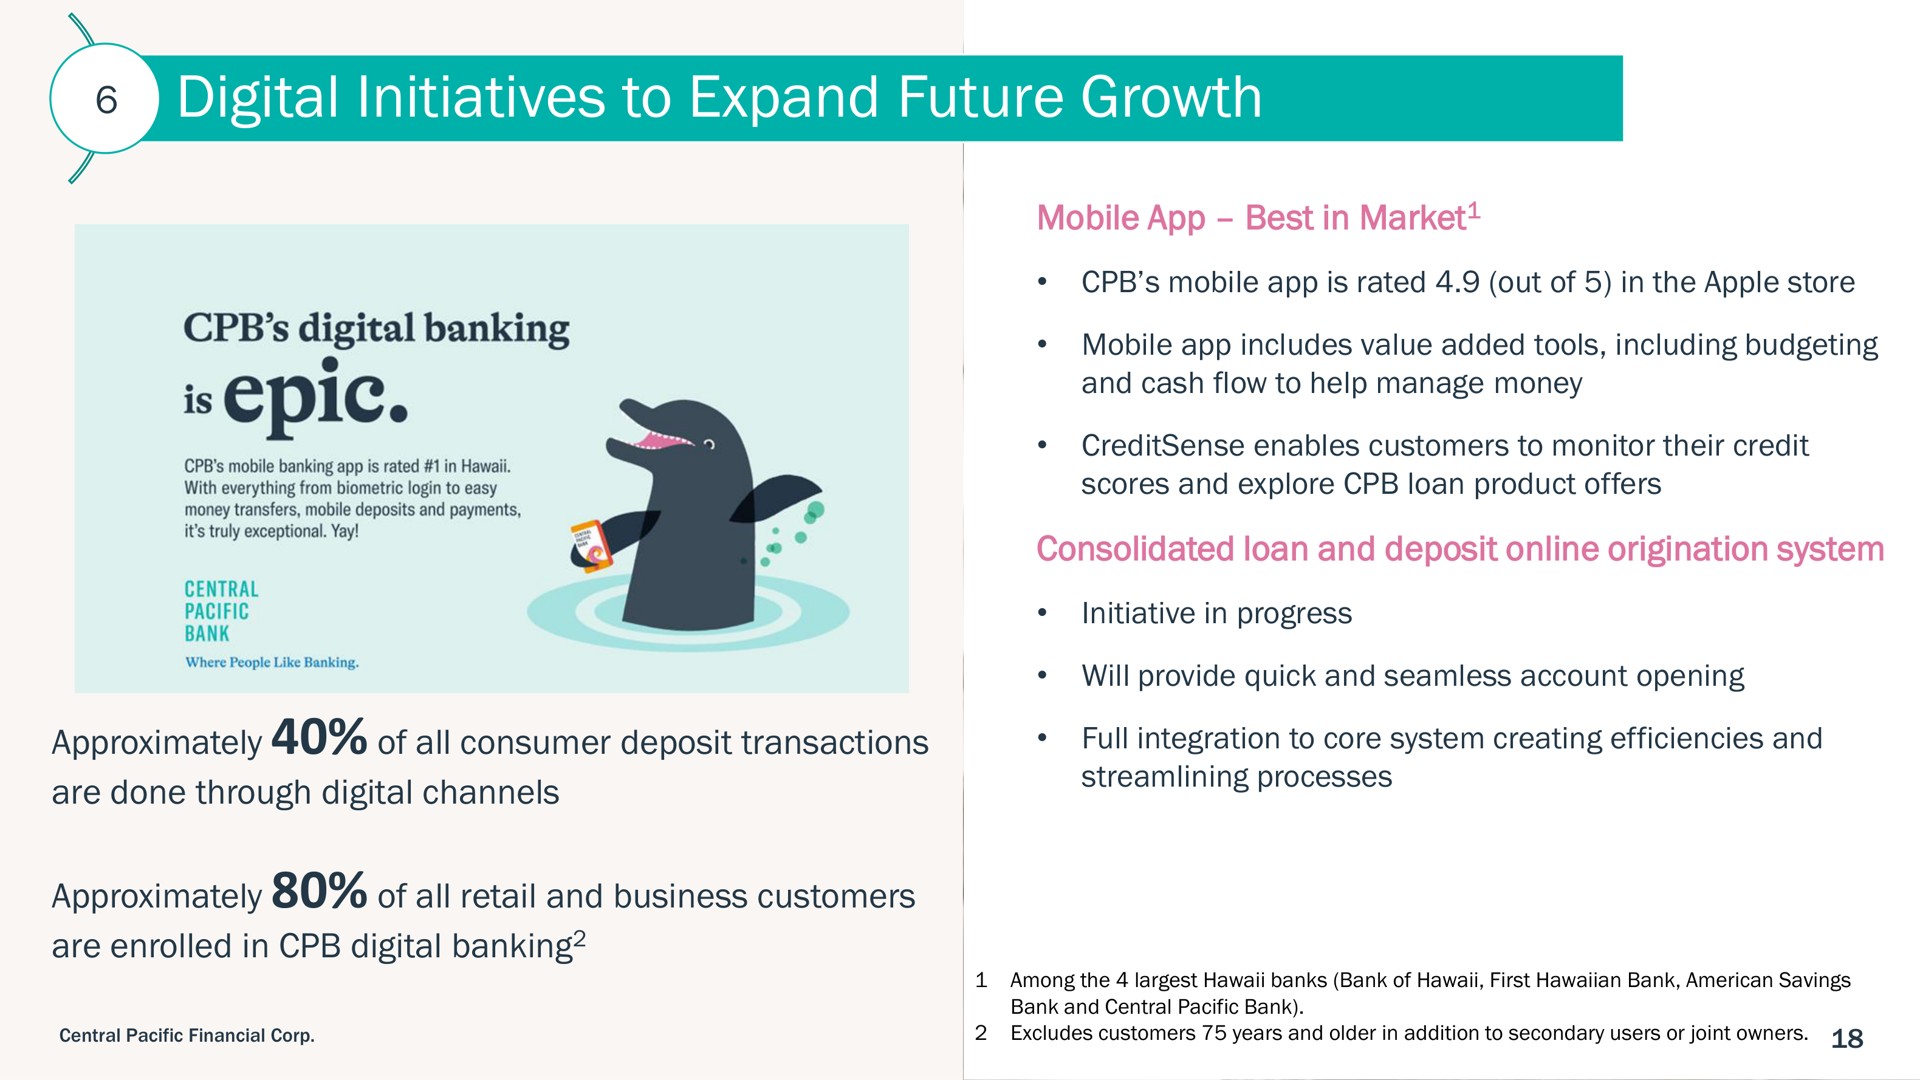 digital initiatives to expand future growth | Central Pacific Financial